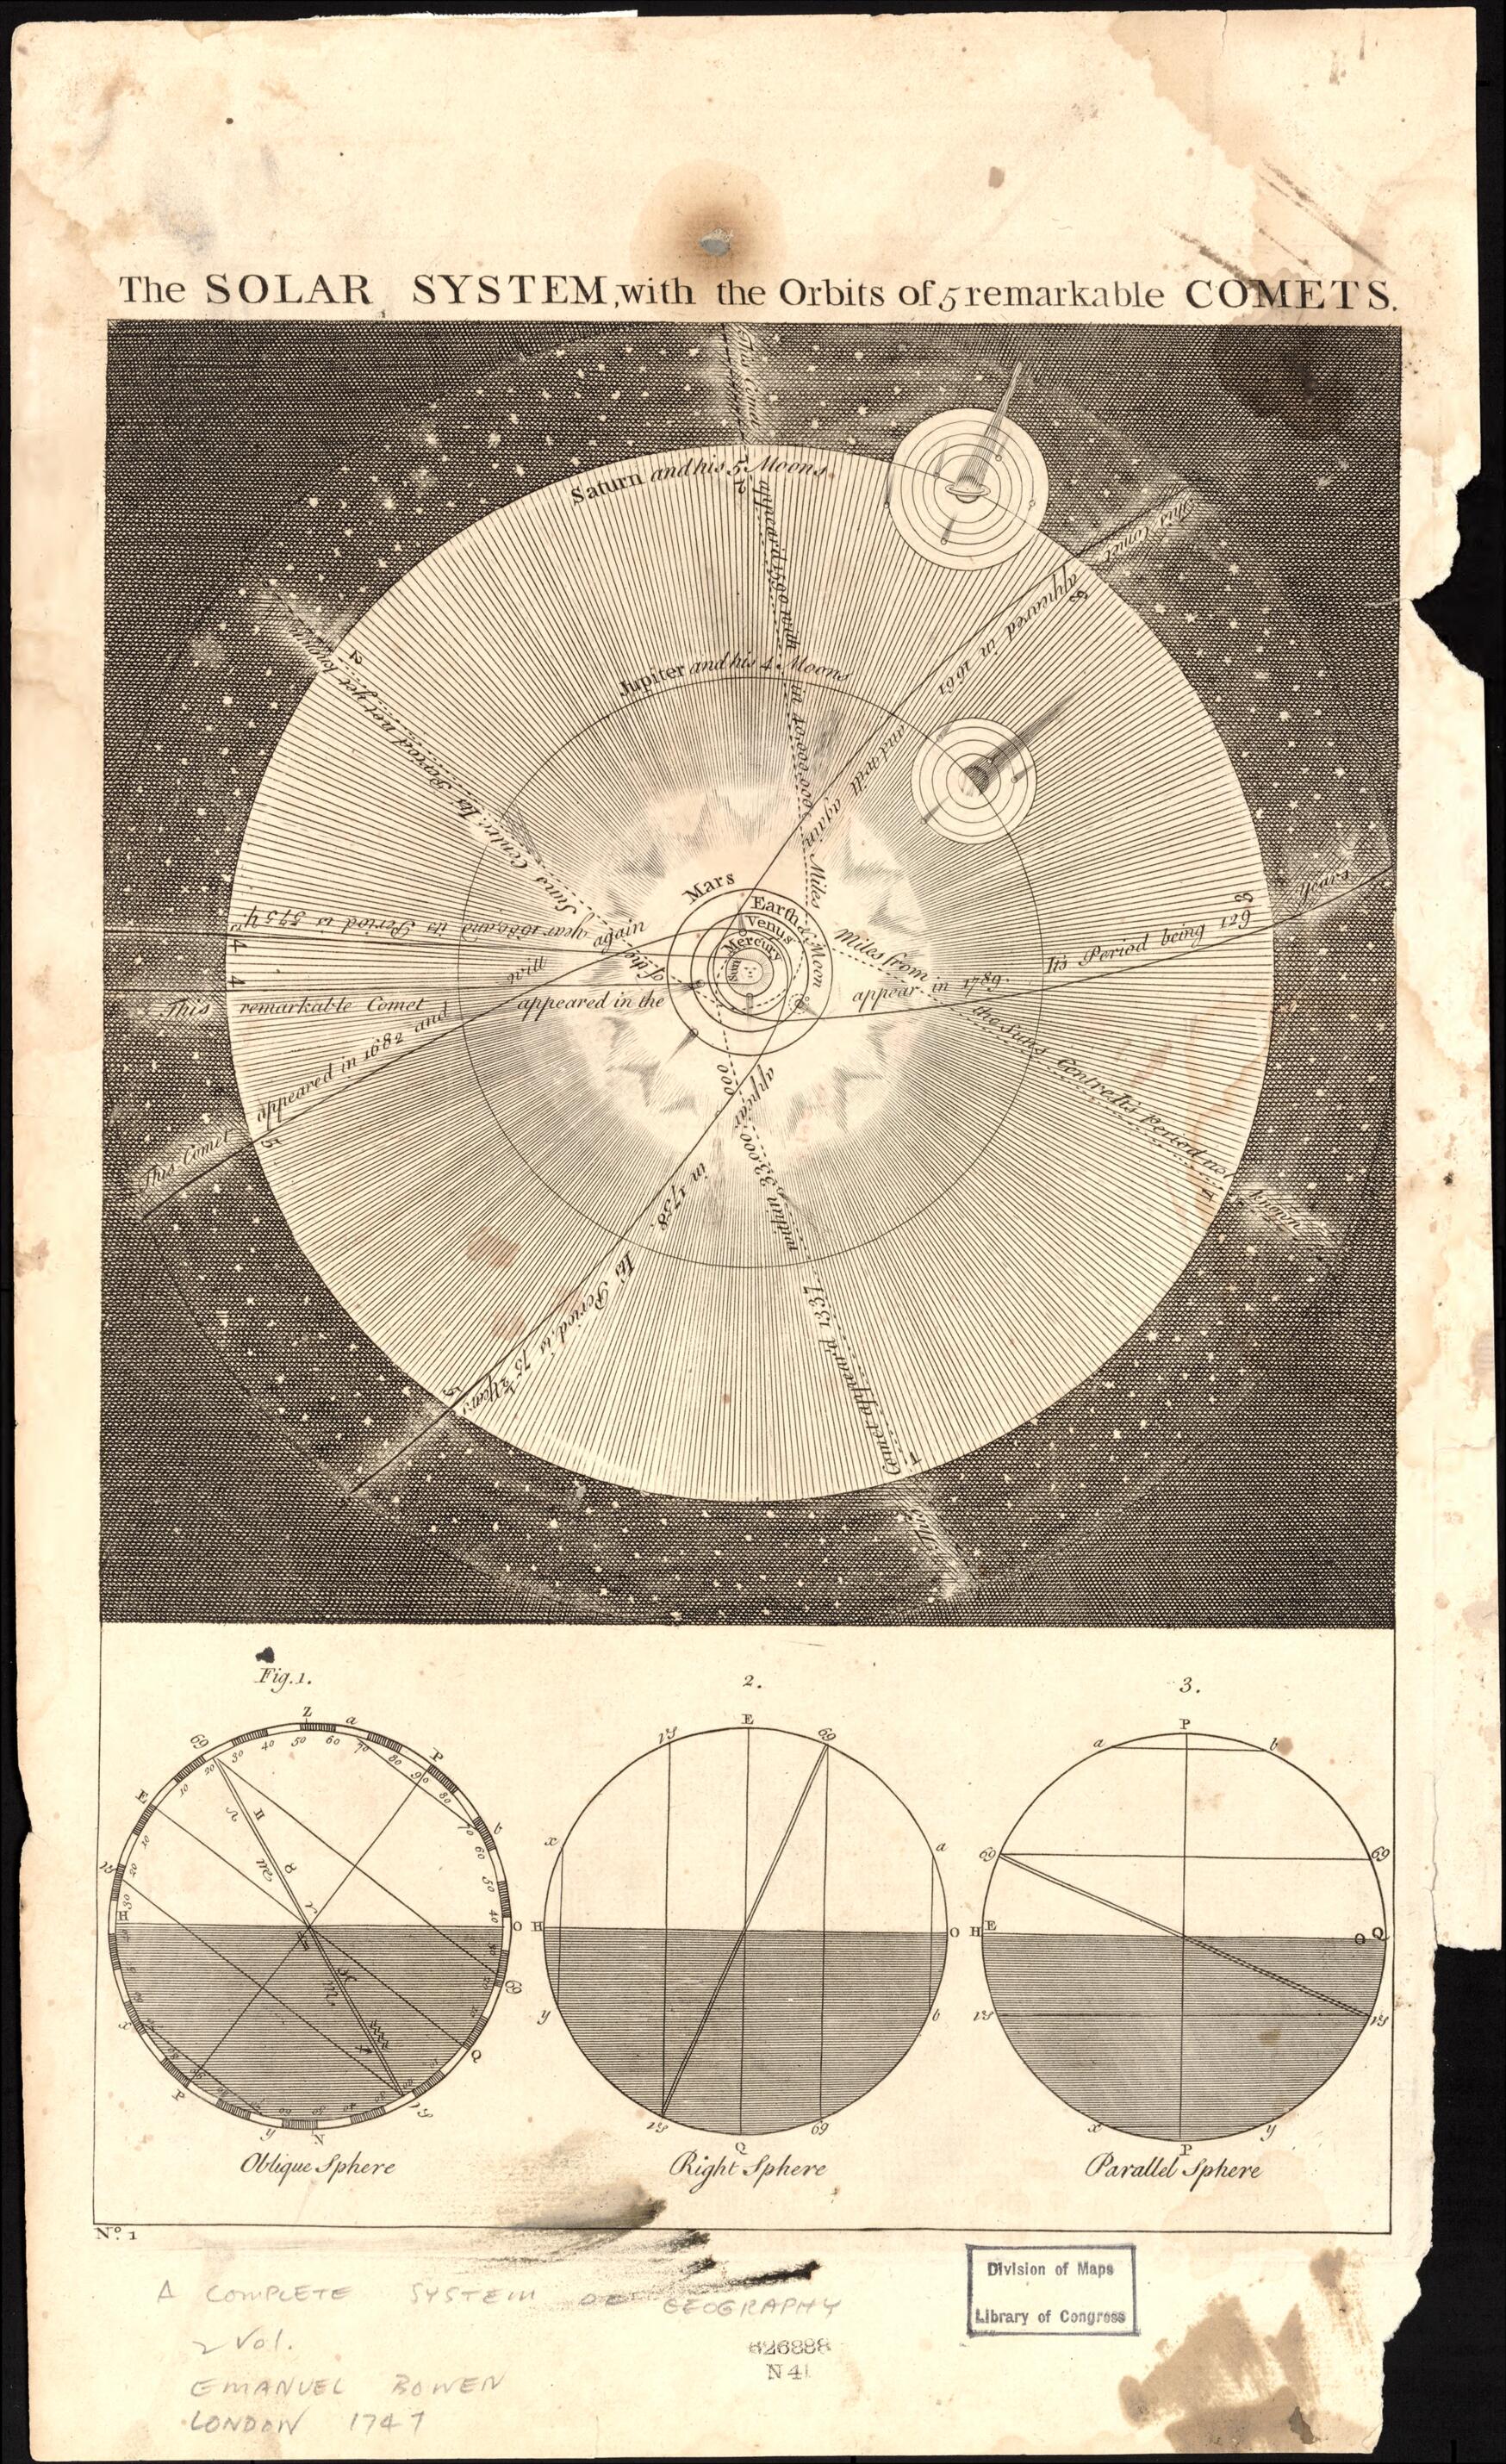 This old map of The Solar System, With the Orbits of 5 Remarkable Comets from 1747 was created by Emanuel Bowen in 1747